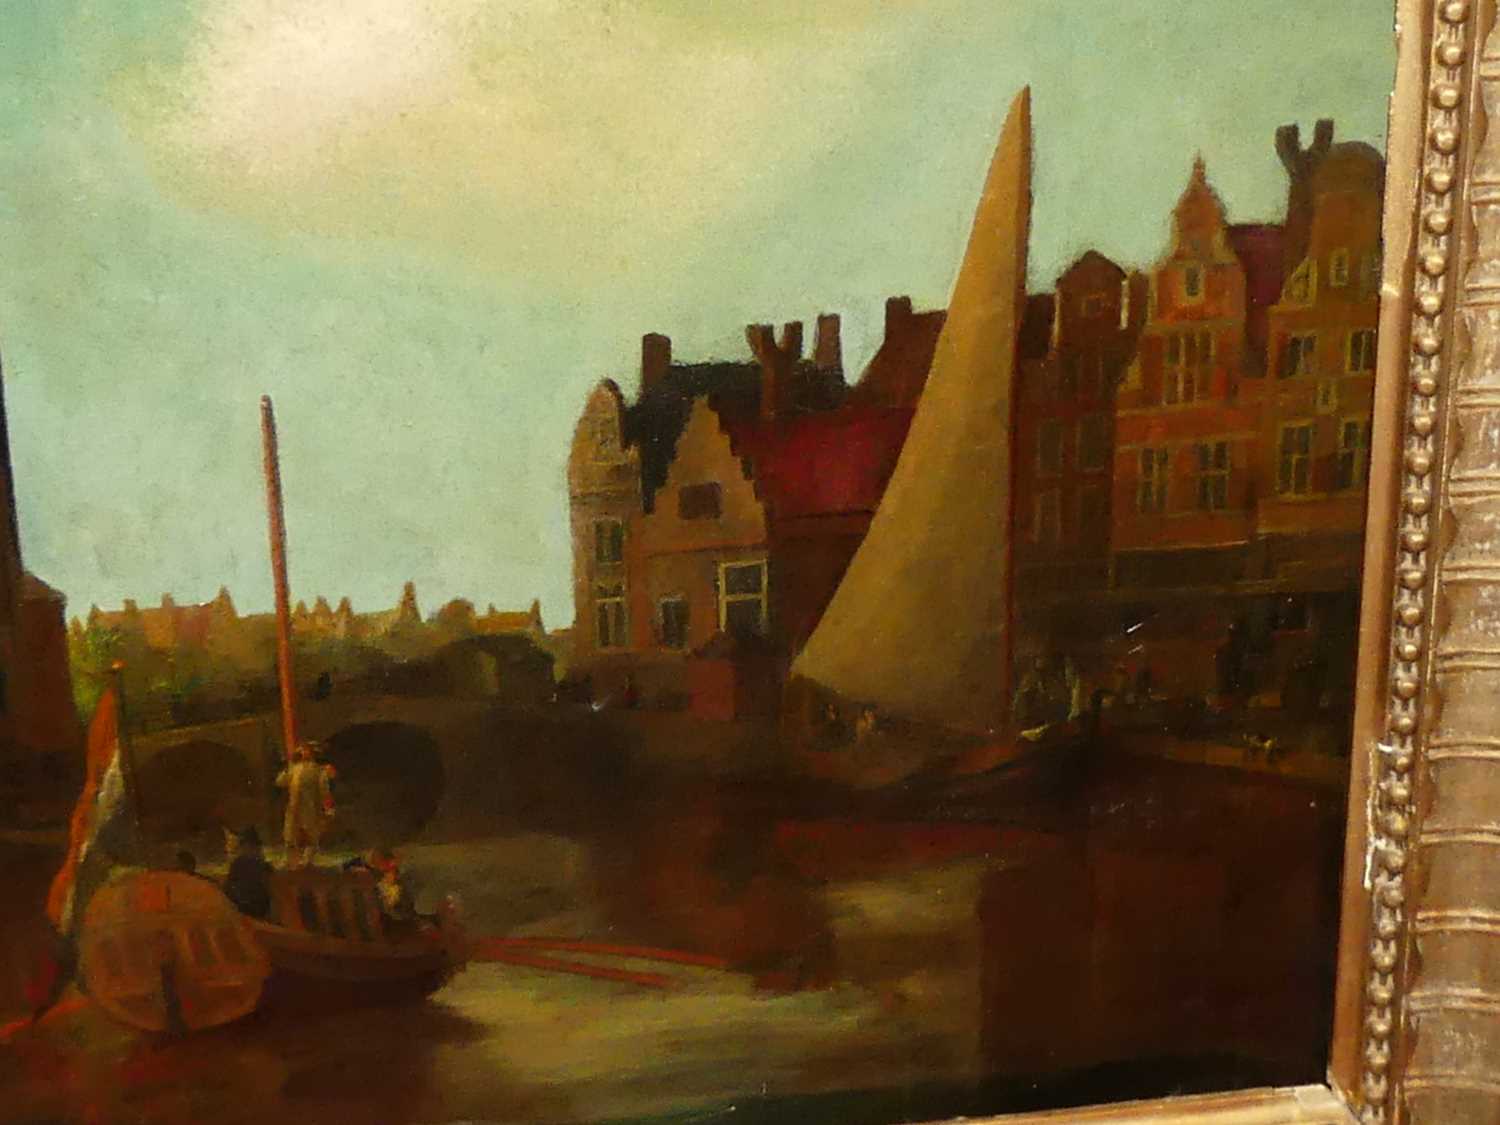 After Abraham Jansz Storck (1644-1708) - Barges on a Dutch canal, oil on canvas, 46x60cm - Image 5 of 9